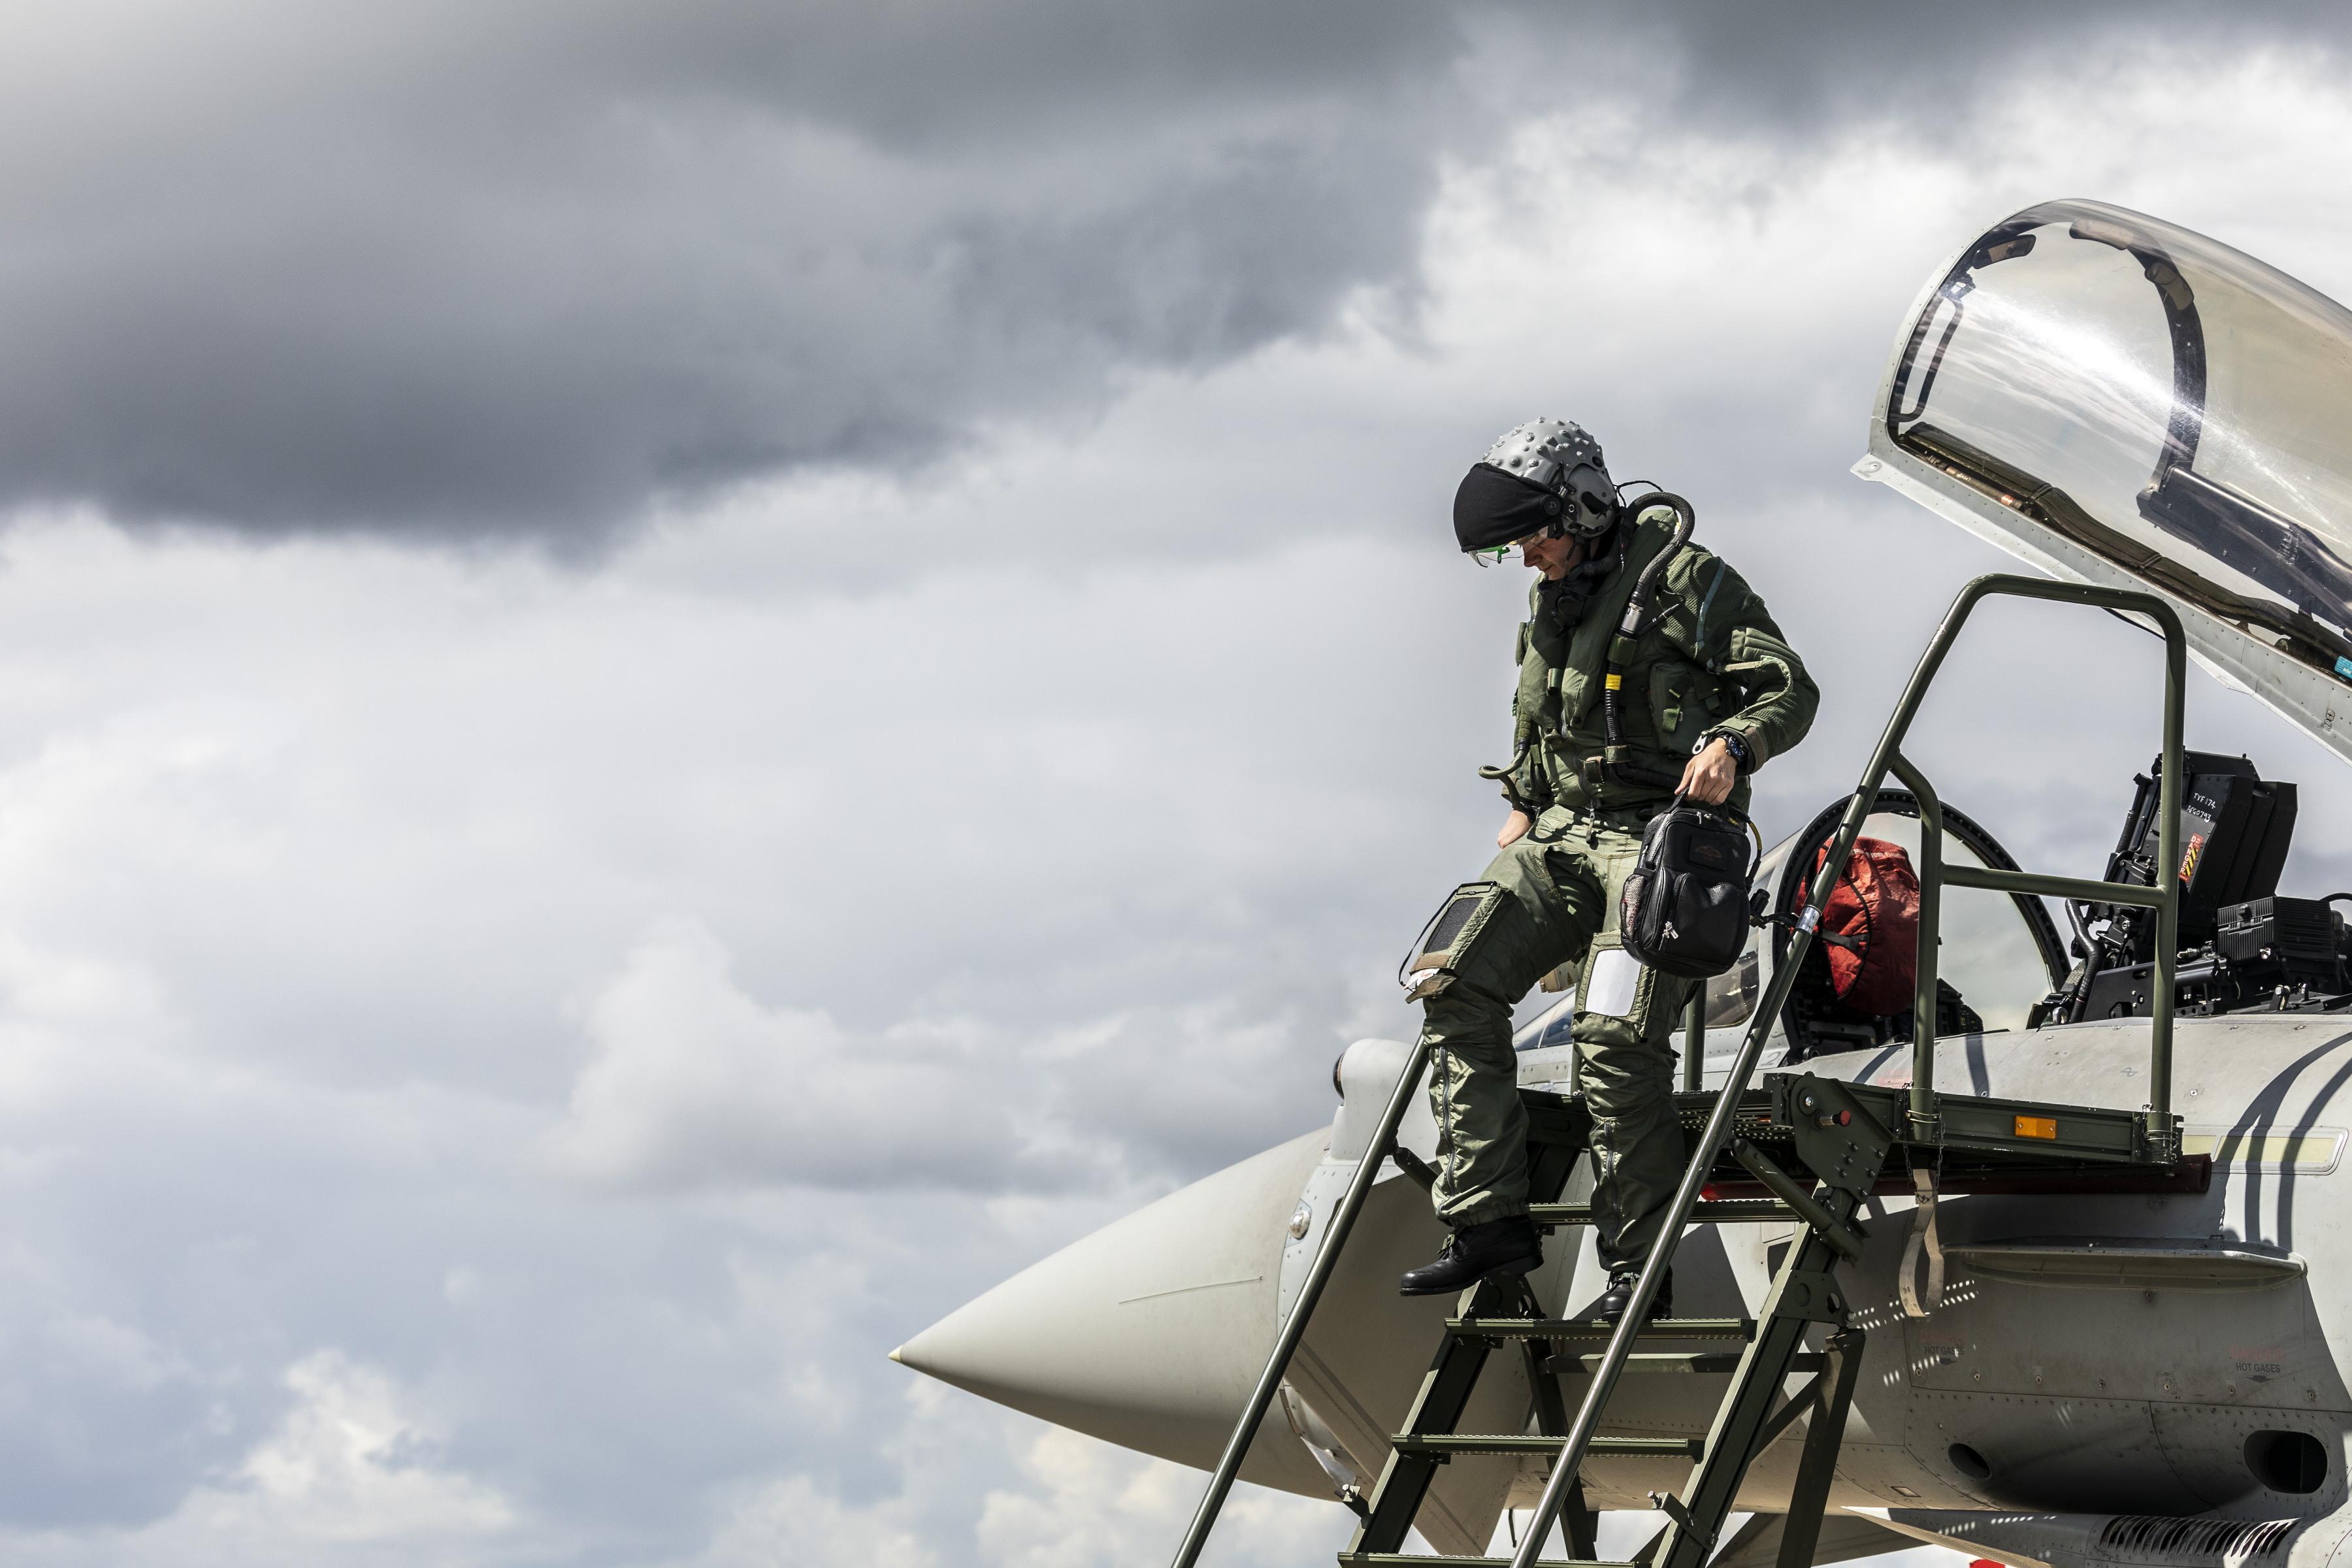 Image shows RAF aviators exiting the cockpit of a Typhoon aircraft on the airfield.